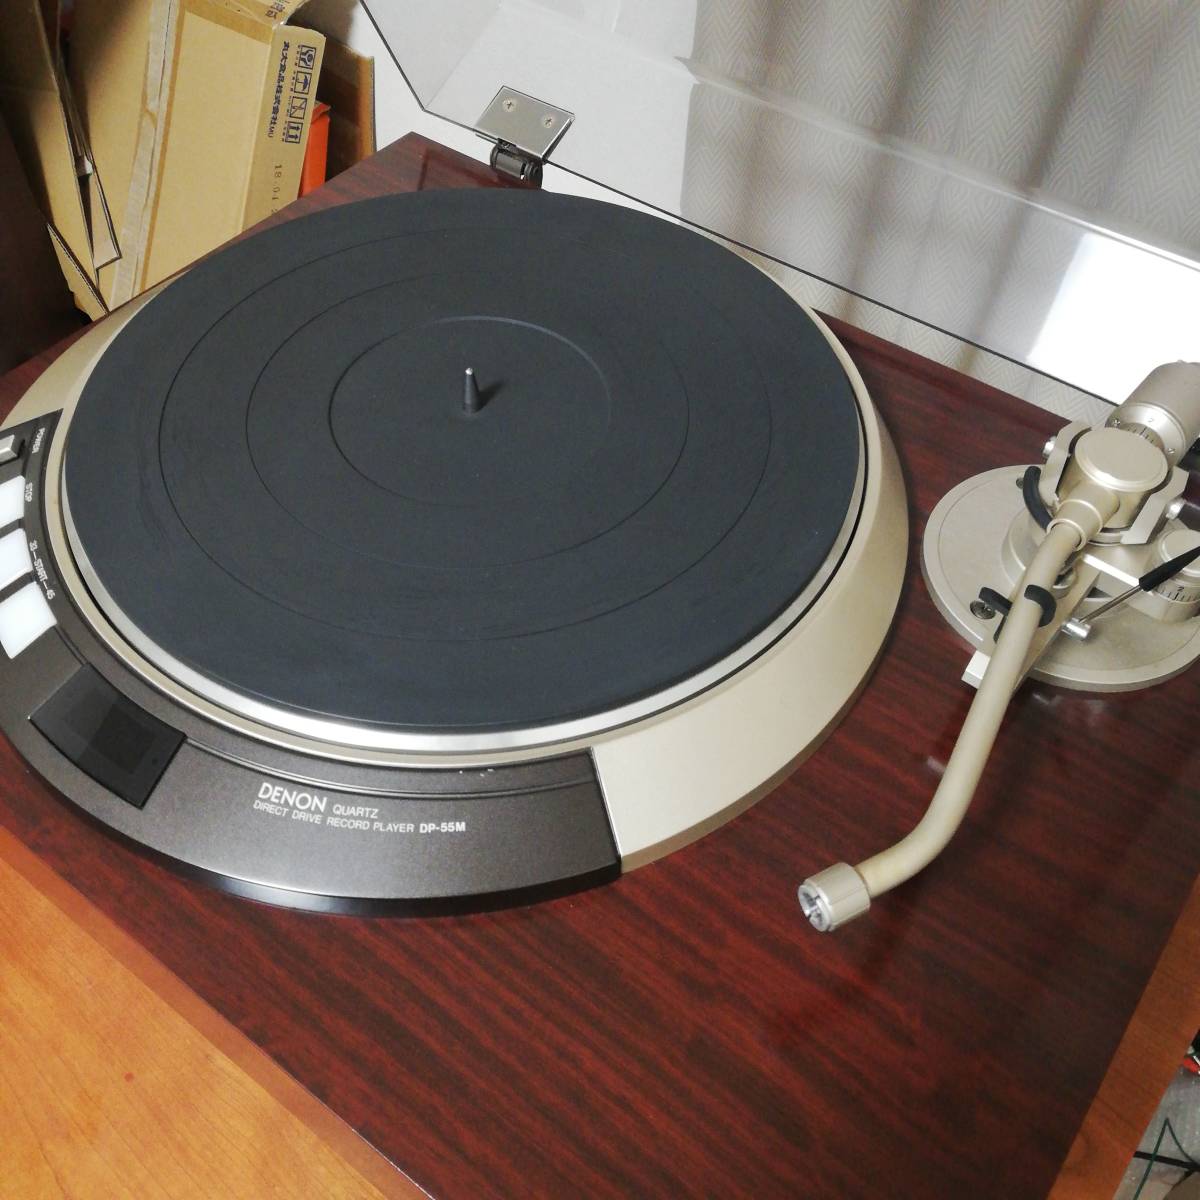  beautiful goods!! operation excellent DENON( Denon ten on ) DP-55M quartz lock installing manual Direct Drive record player made in Japan MADE IN JAPAN